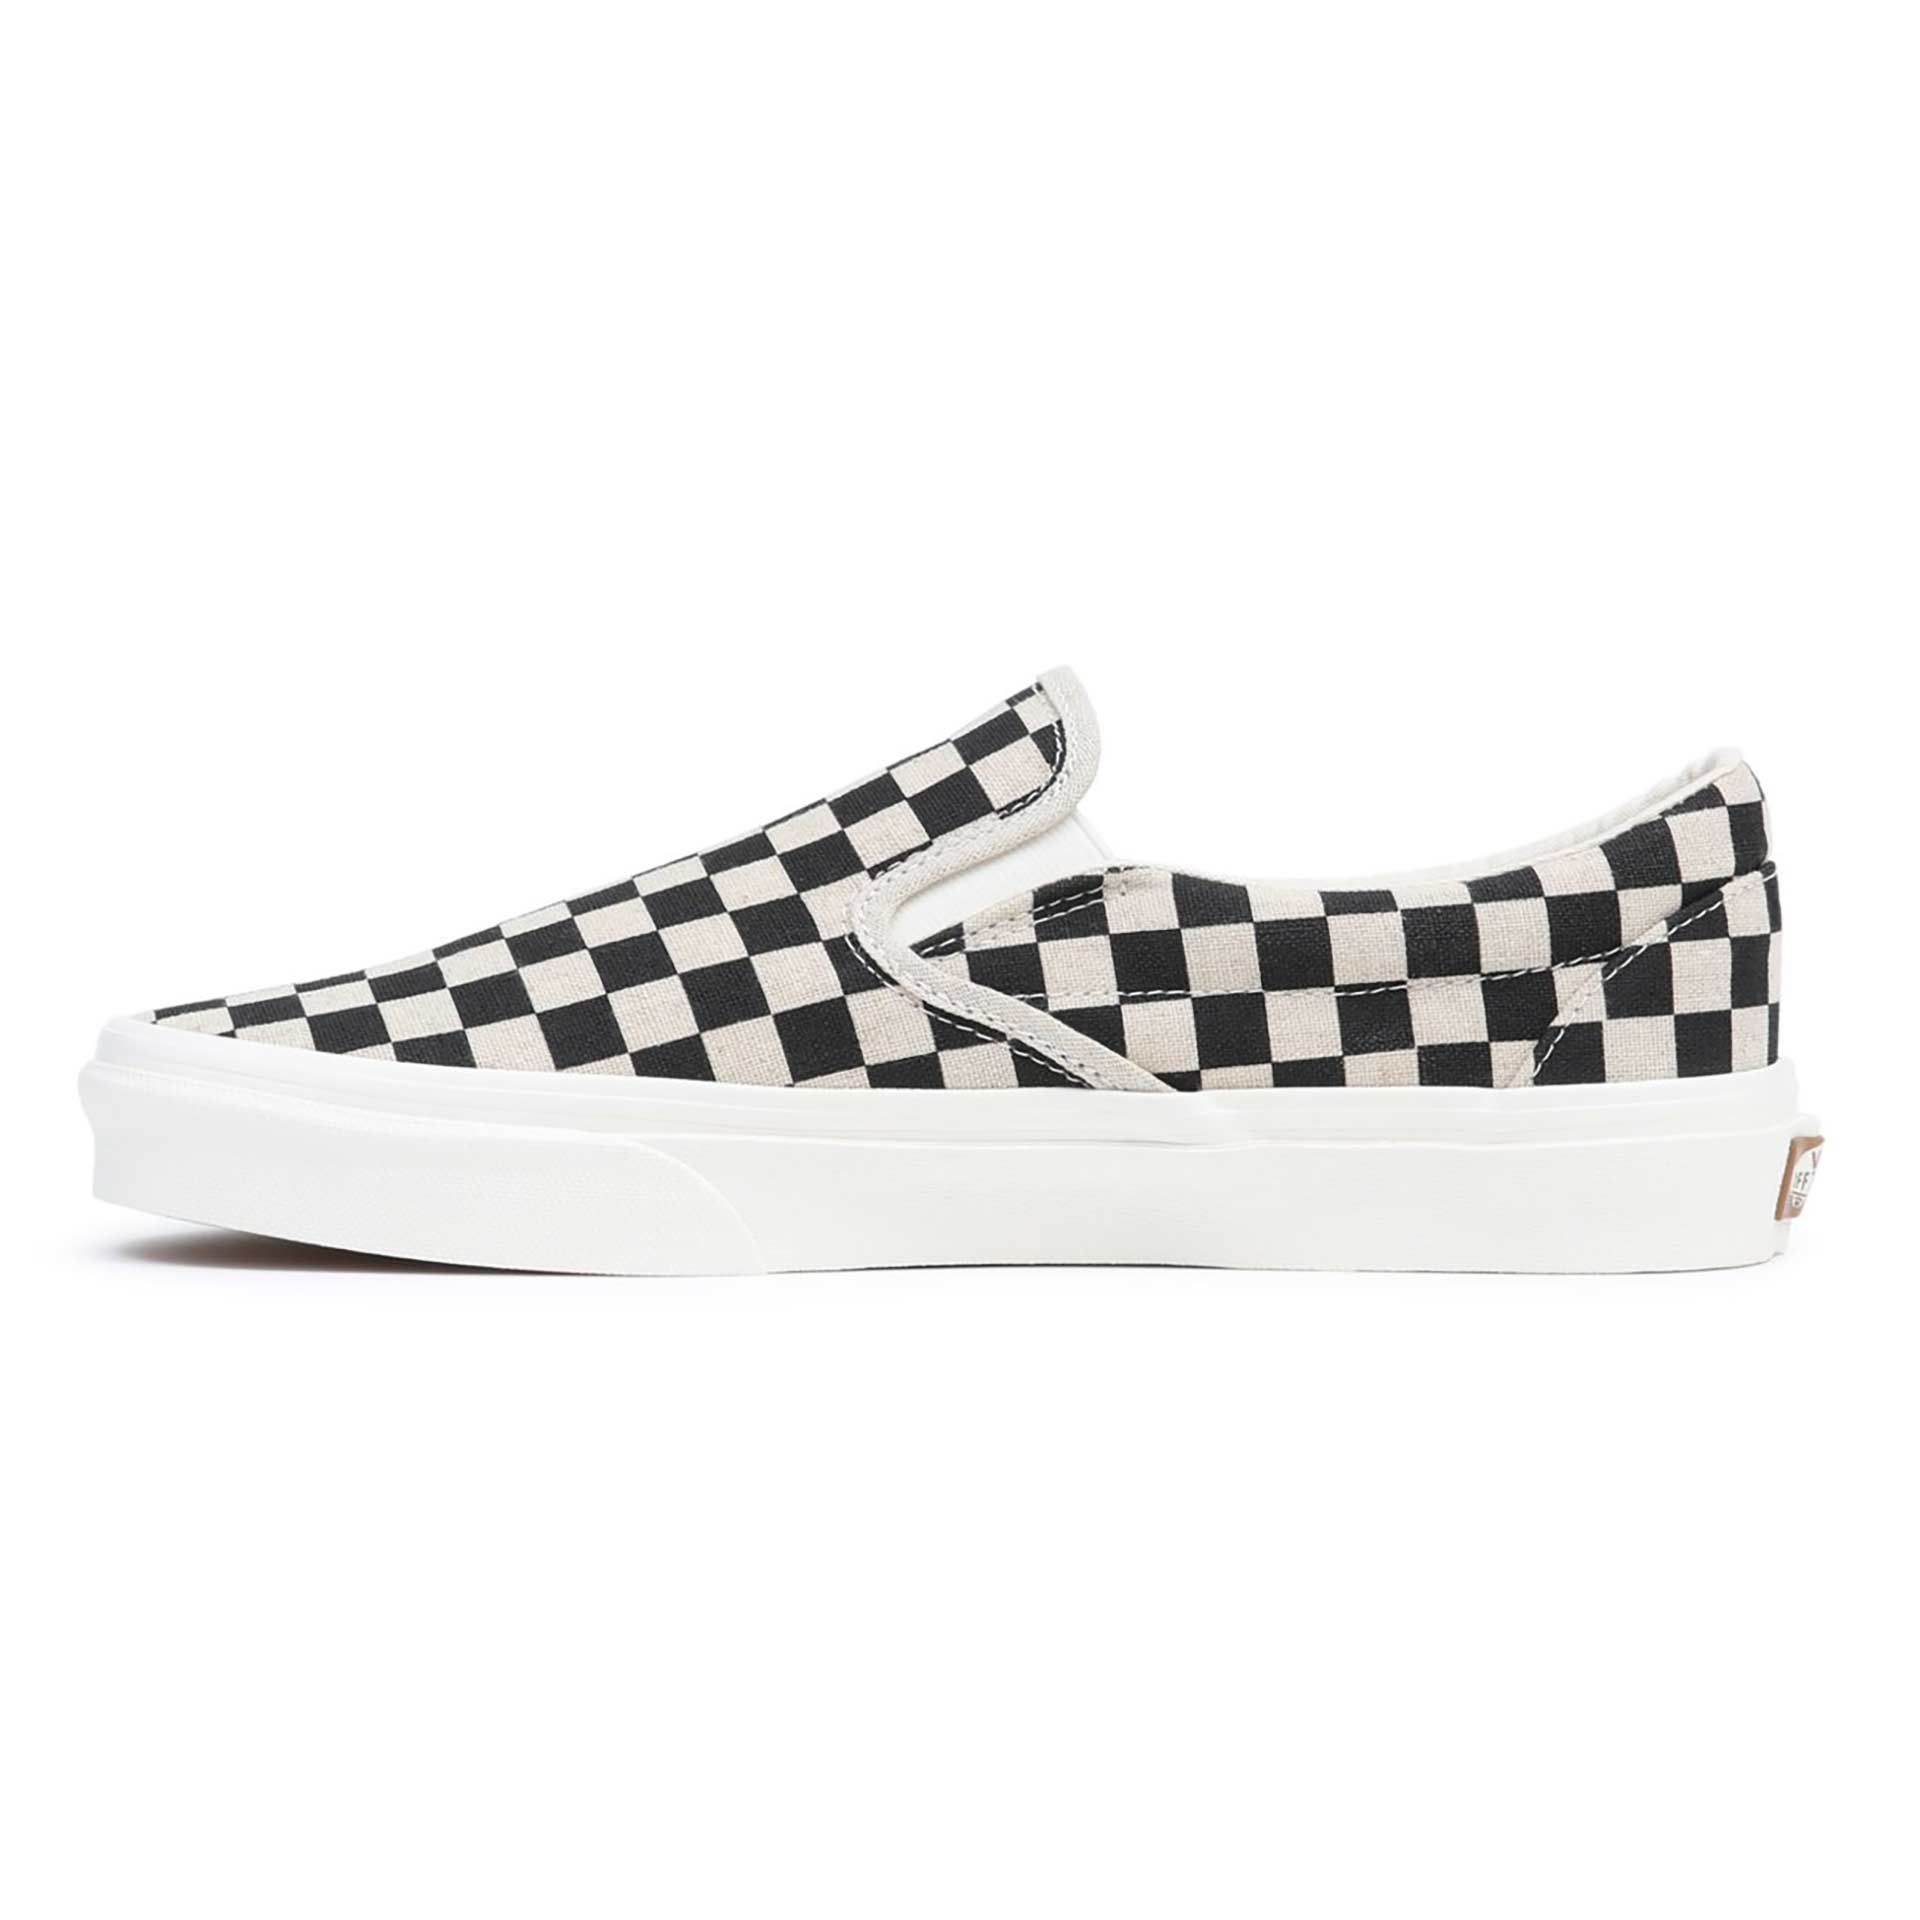 Vans Classic Slip-On Eco Theory Checkerboard Black/White 01